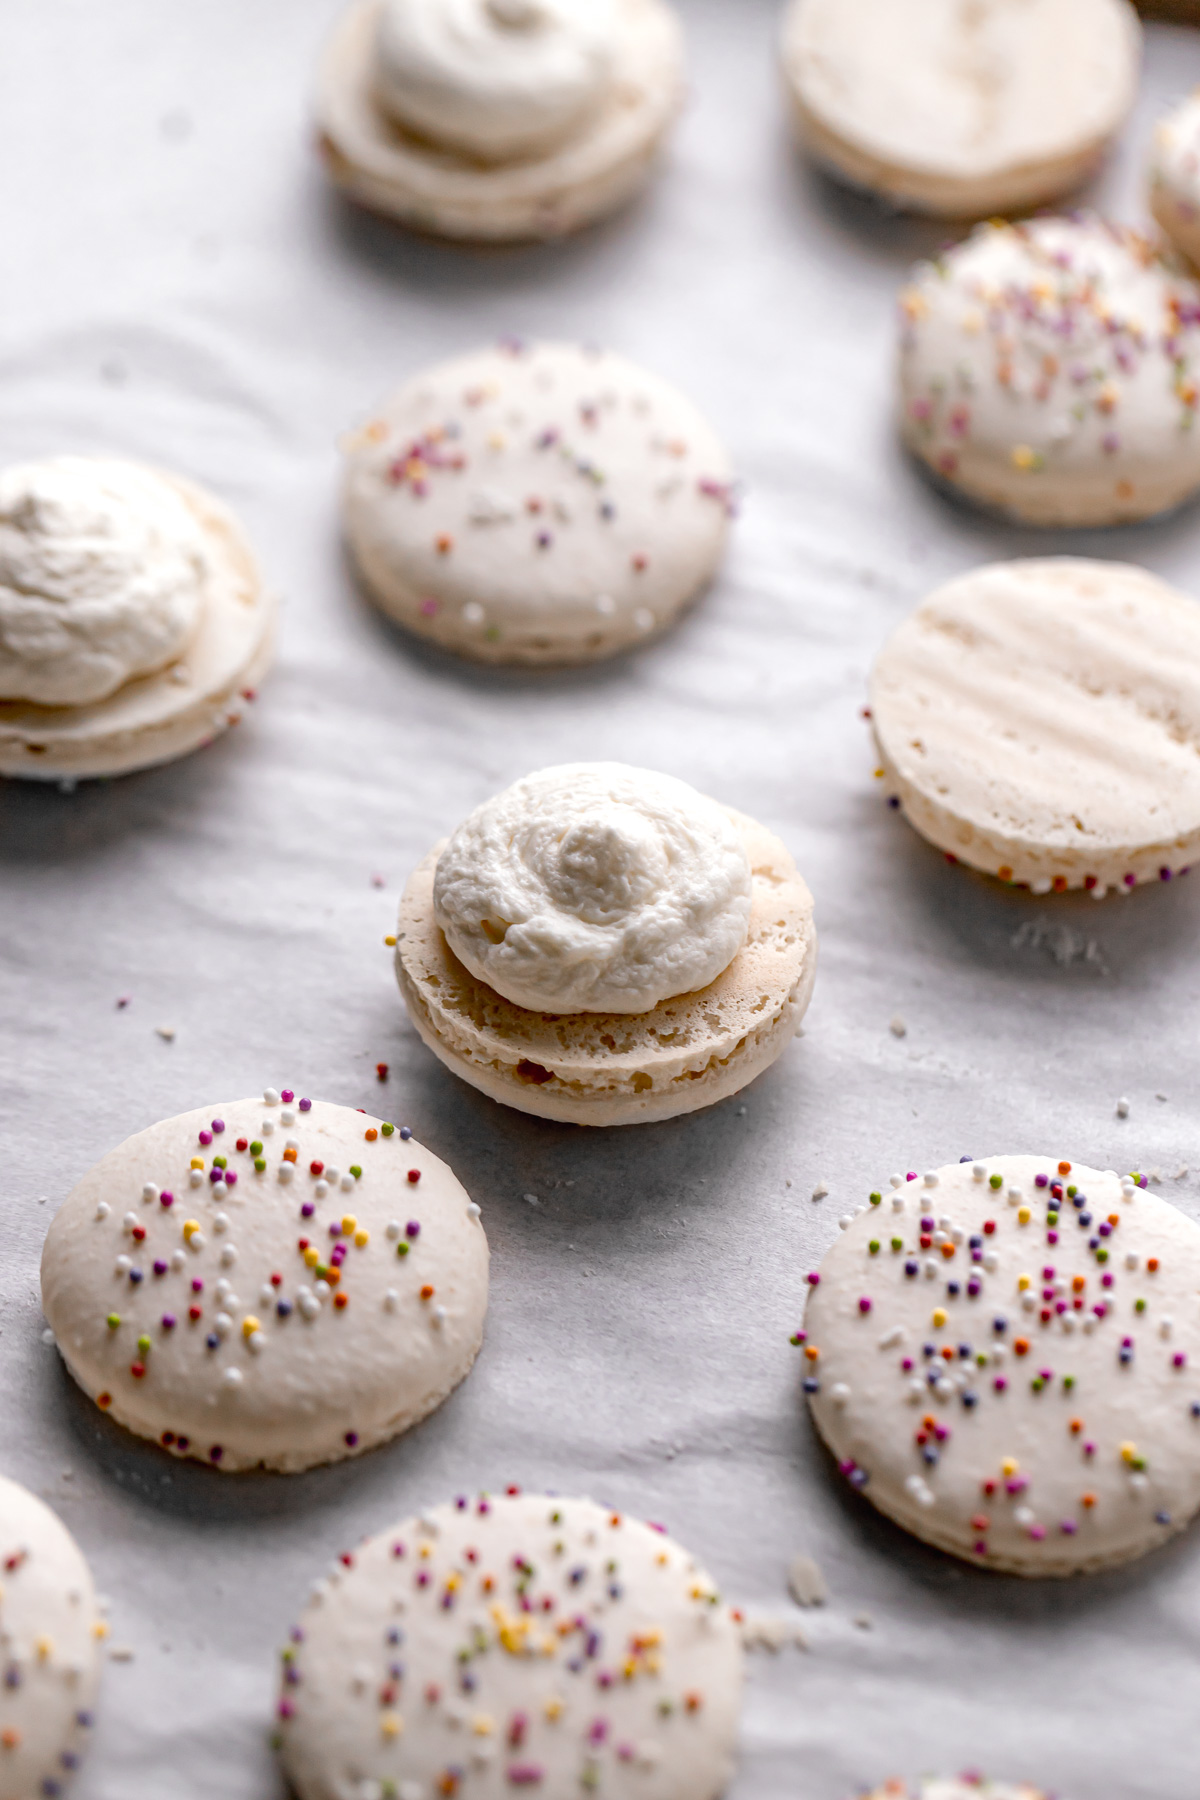 whipped cream cheese frosting piped onto bottom birthday cake macaron shells.